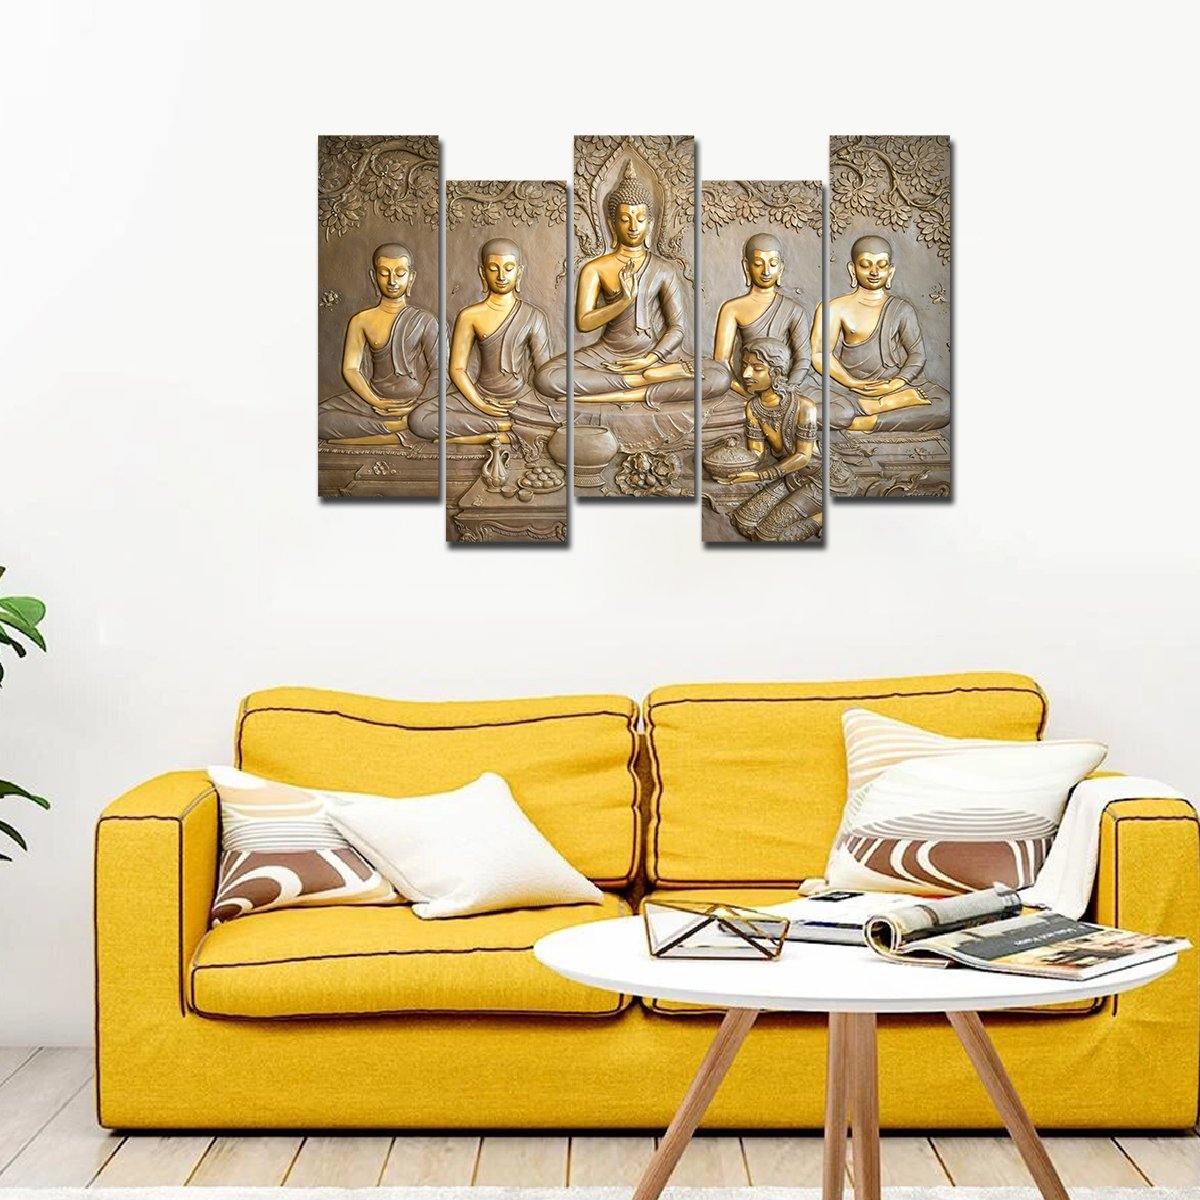 A Beautiful 5 Pieces Wall Painting of Lord Buddha in Temple - Vibecrafts